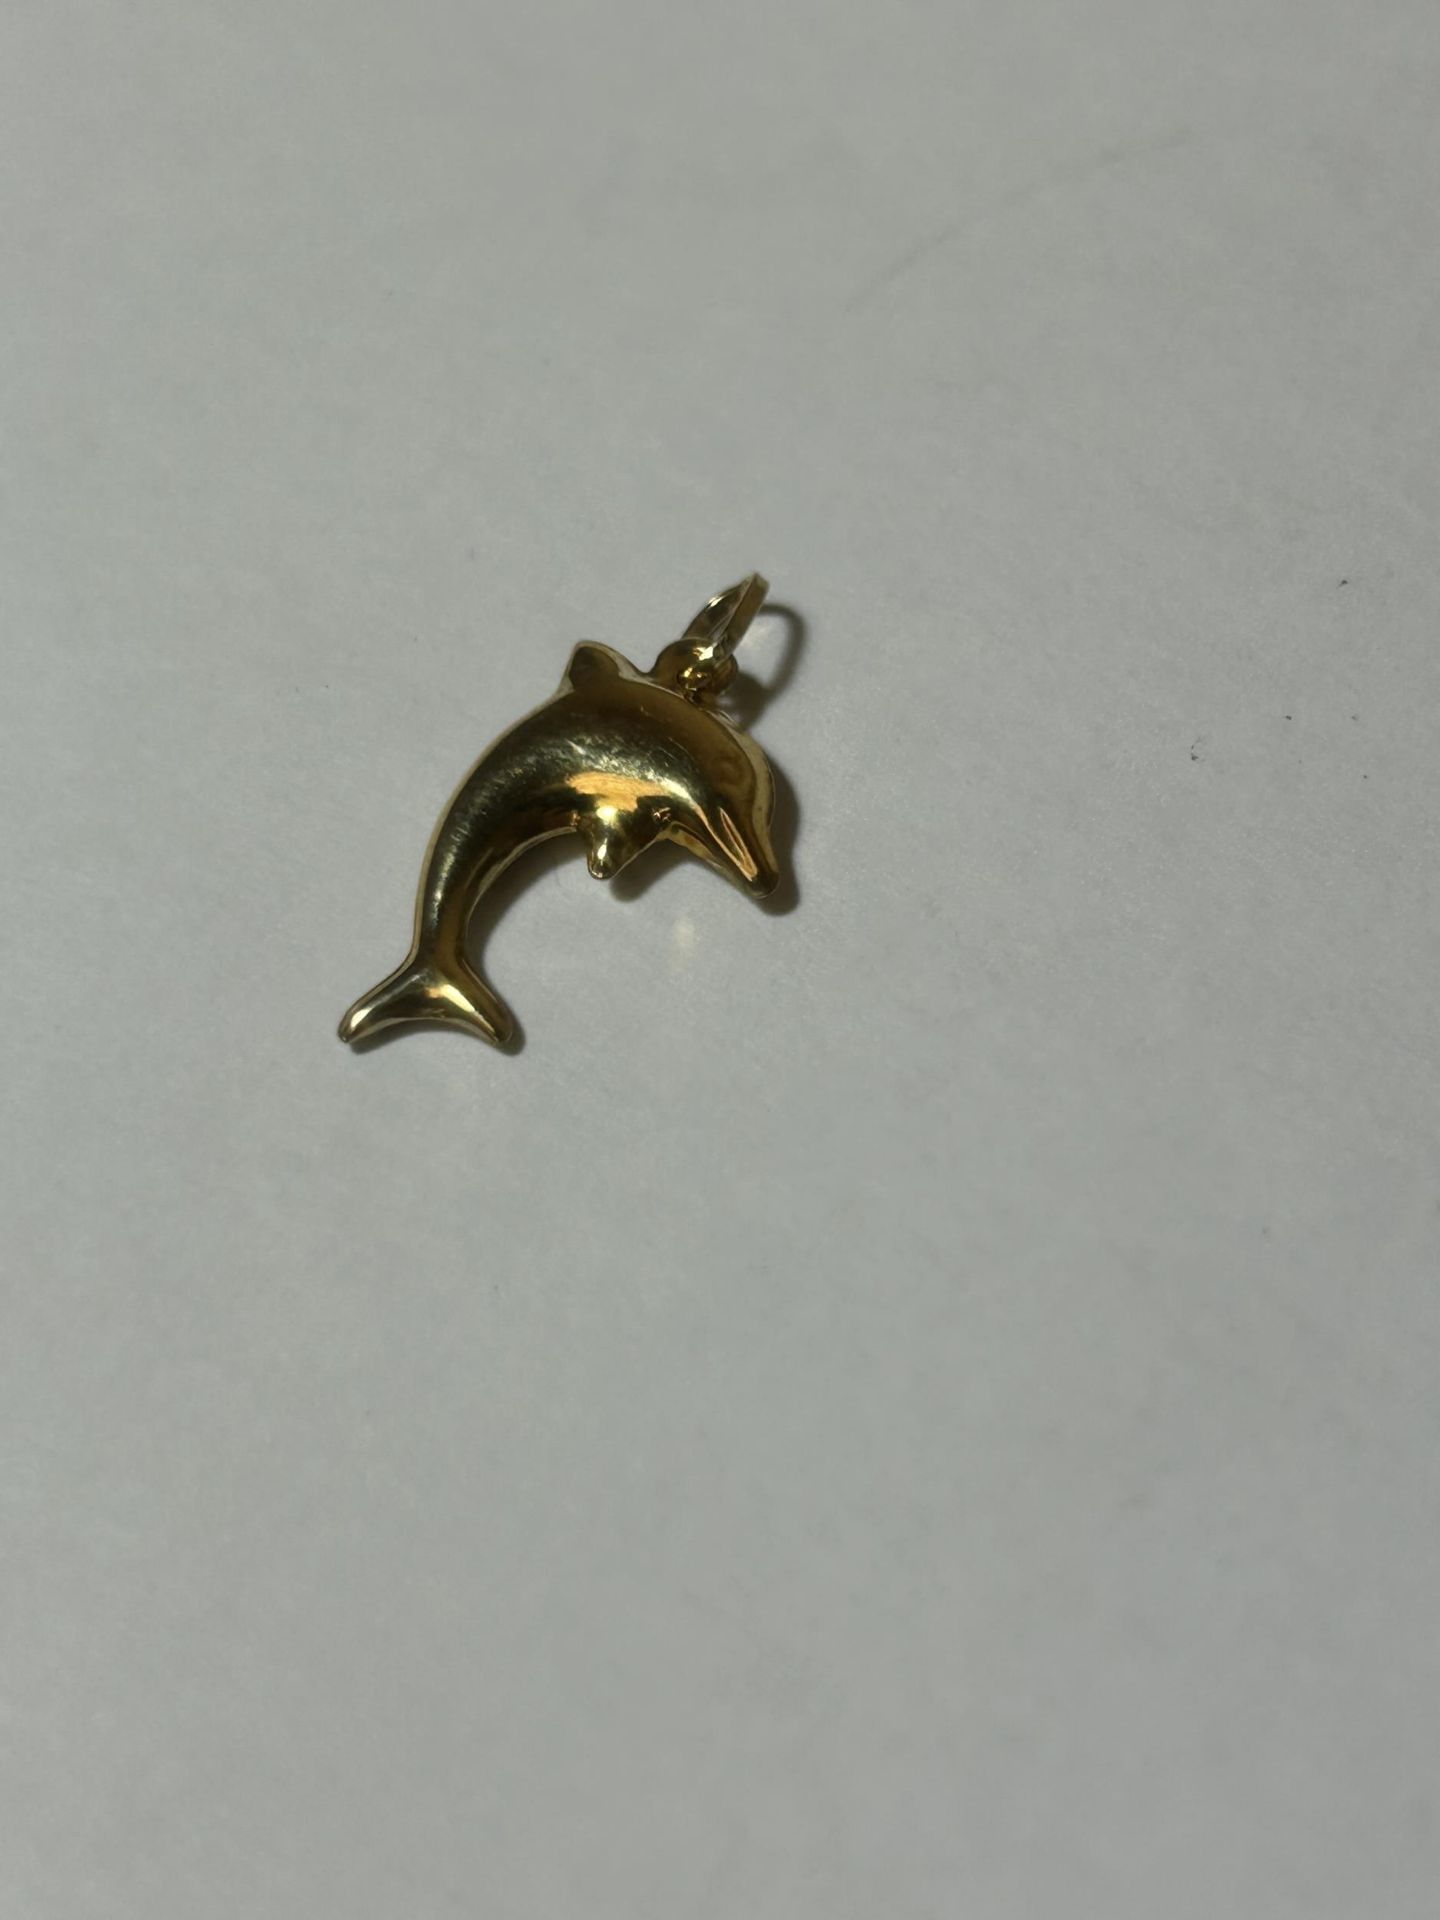 A 9CT YELLOW GOLD DOLPHIN CHARM - Image 2 of 2